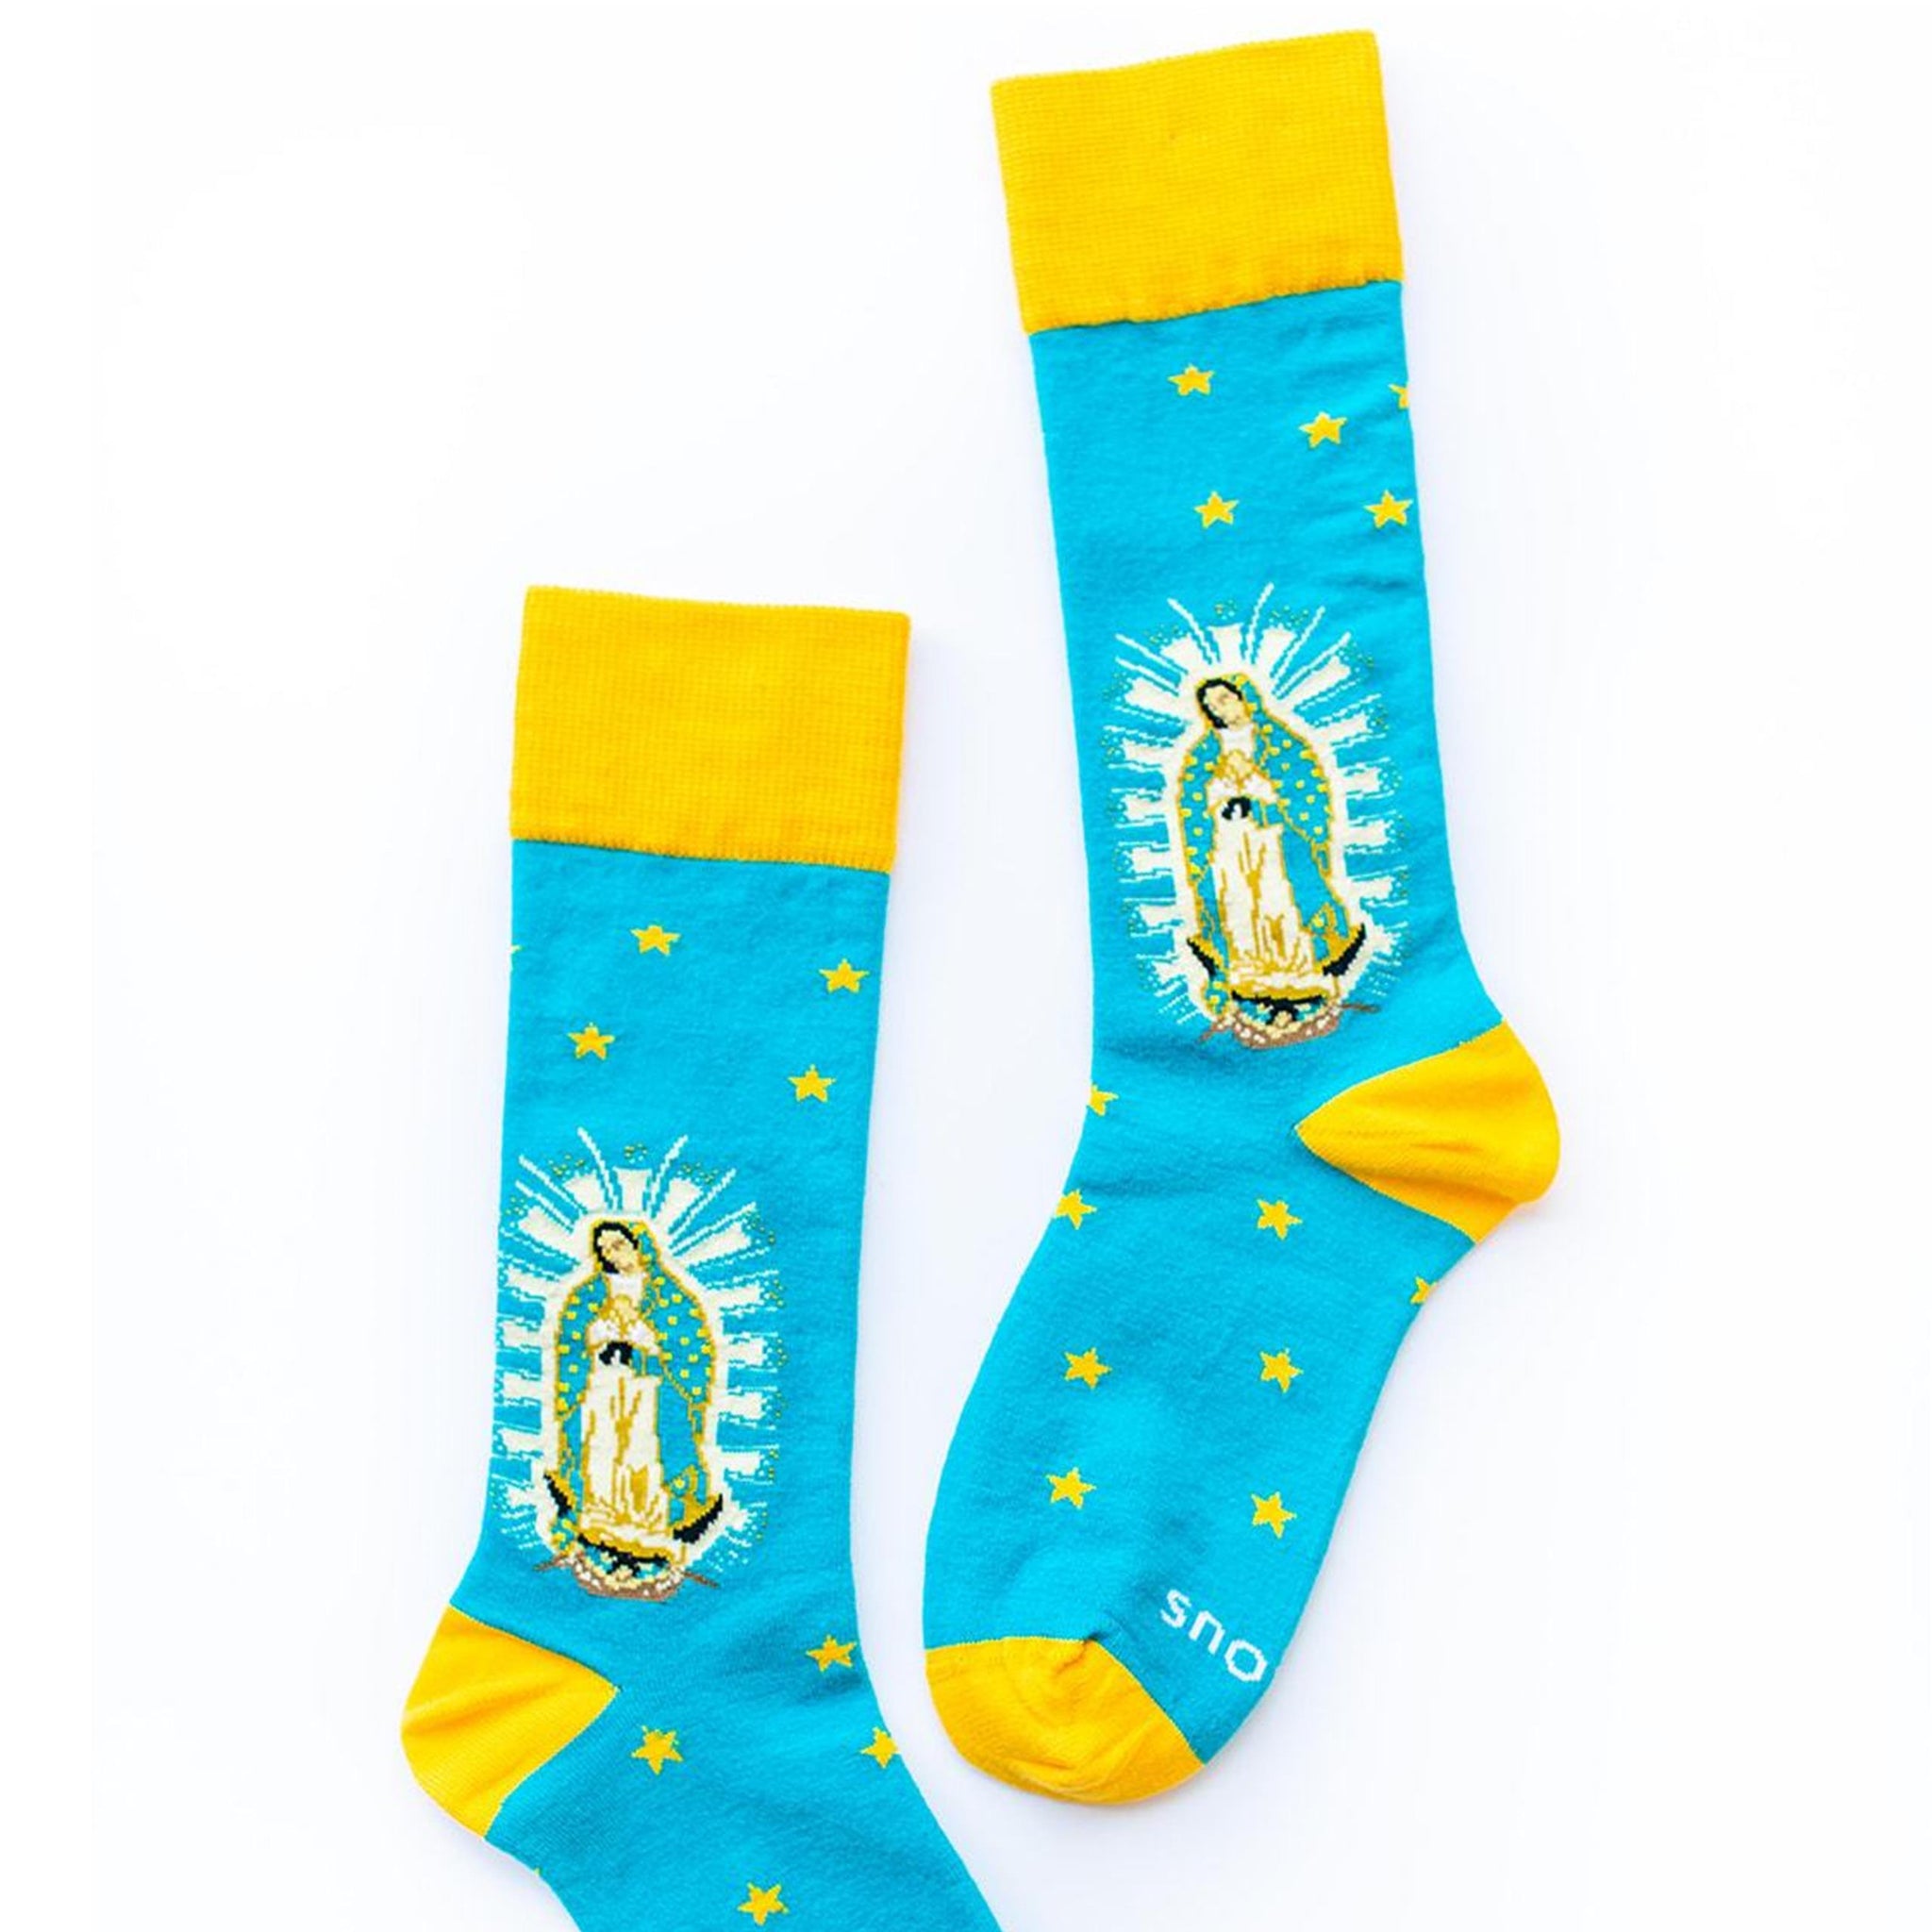 Our Lady of Guadalupe - Unisex Adult & Children's Socks